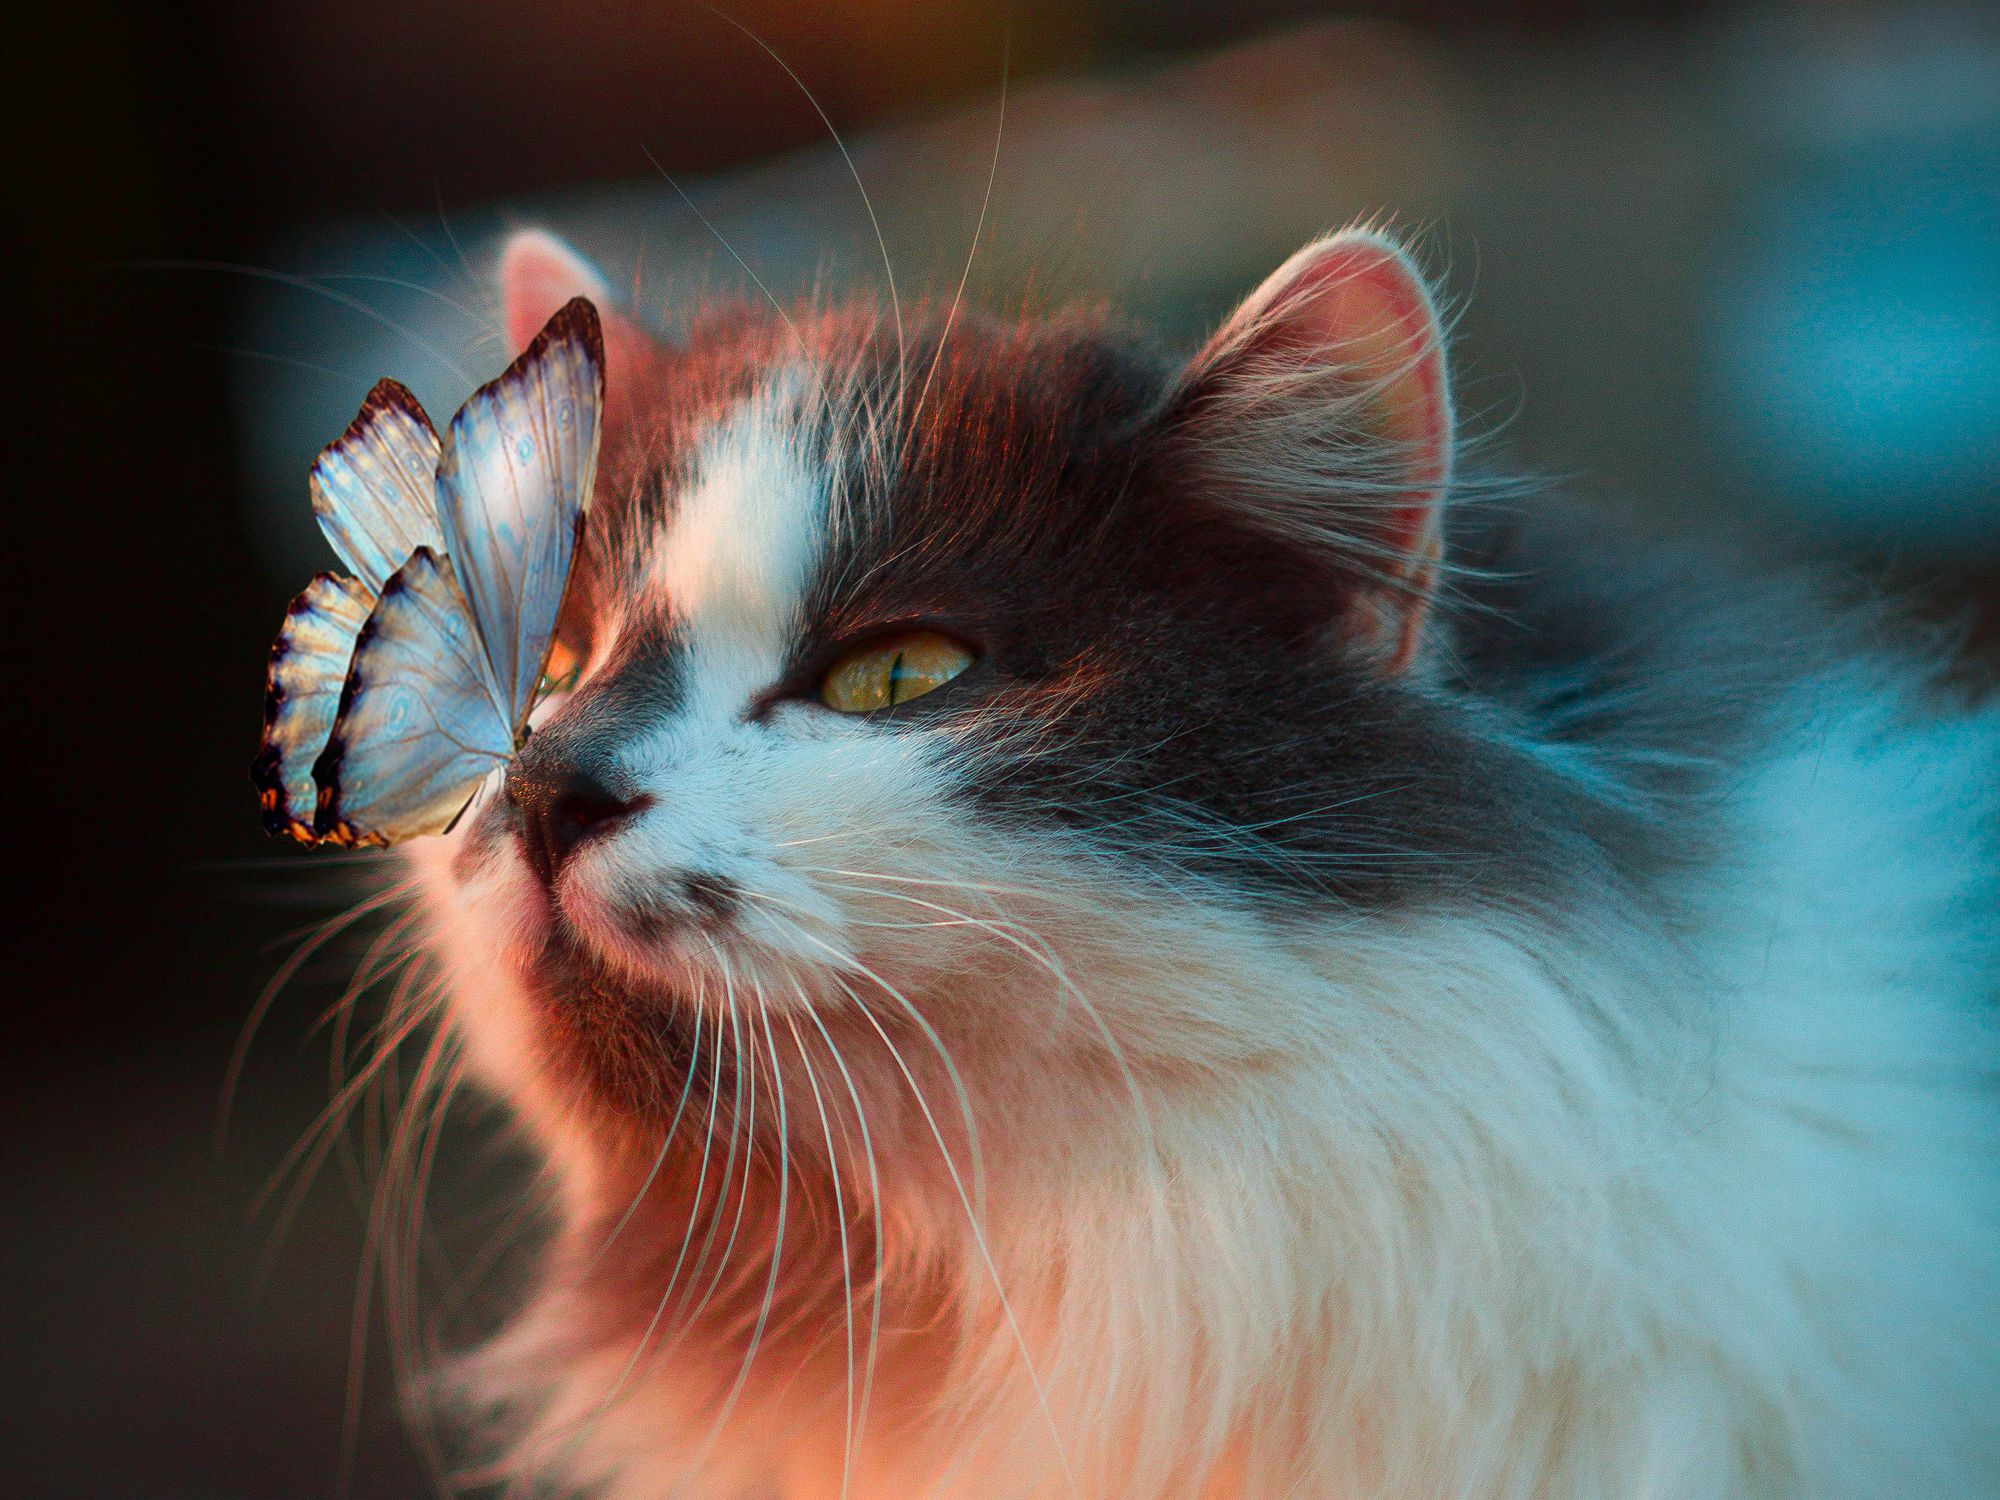 Butterfly on Cat's Nose HD Wallpaper. Background Image